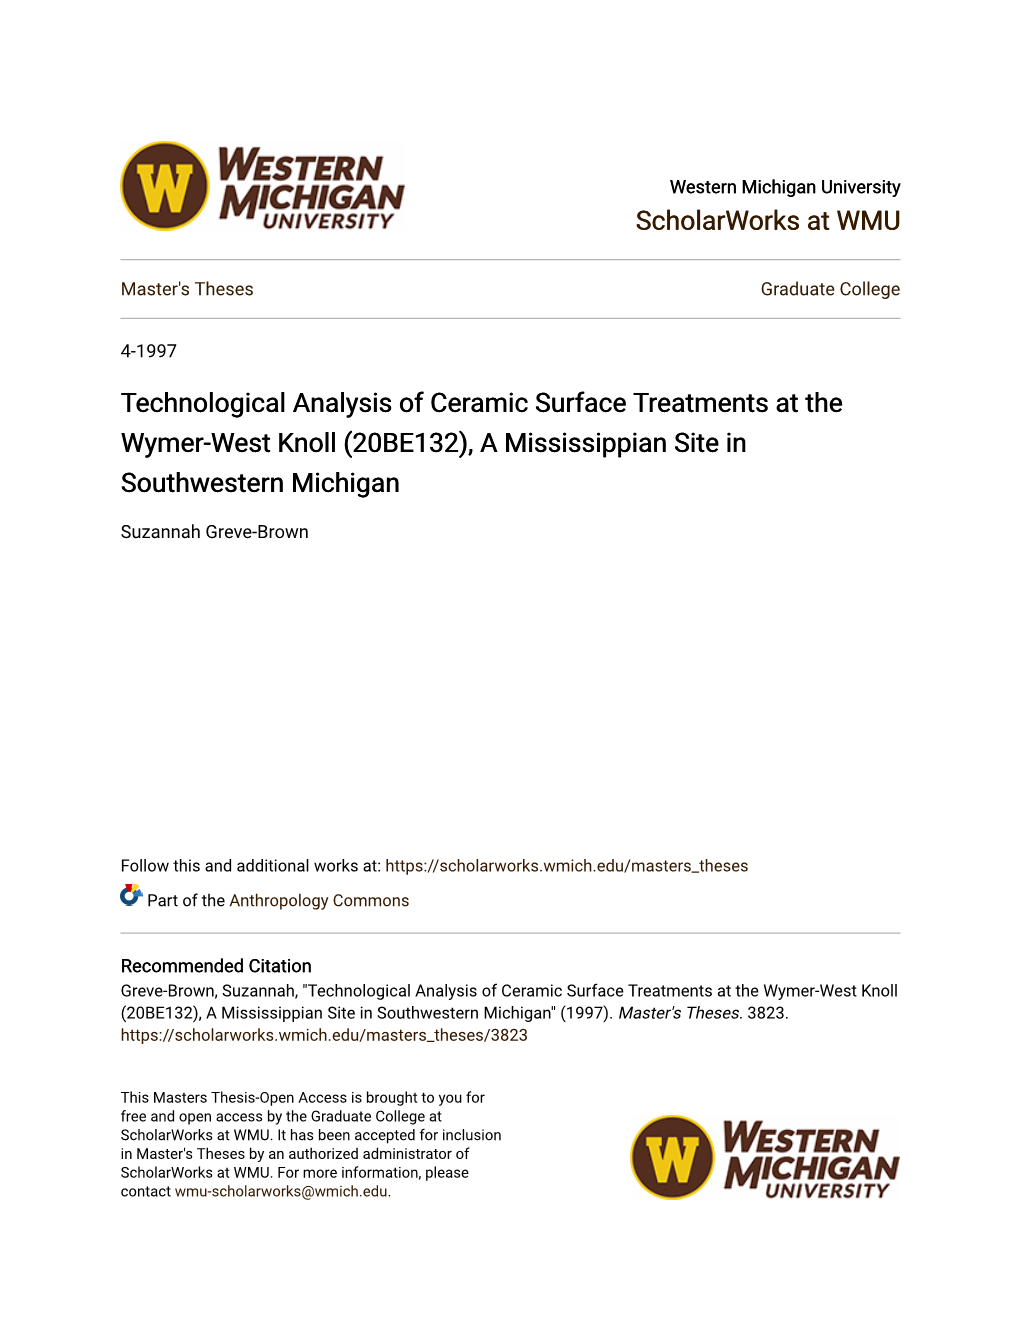 Technological Analysis of Ceramic Surface Treatments at the Wymer-West Knoll (20BE132), a Mississippian Site in Southwestern Michigan